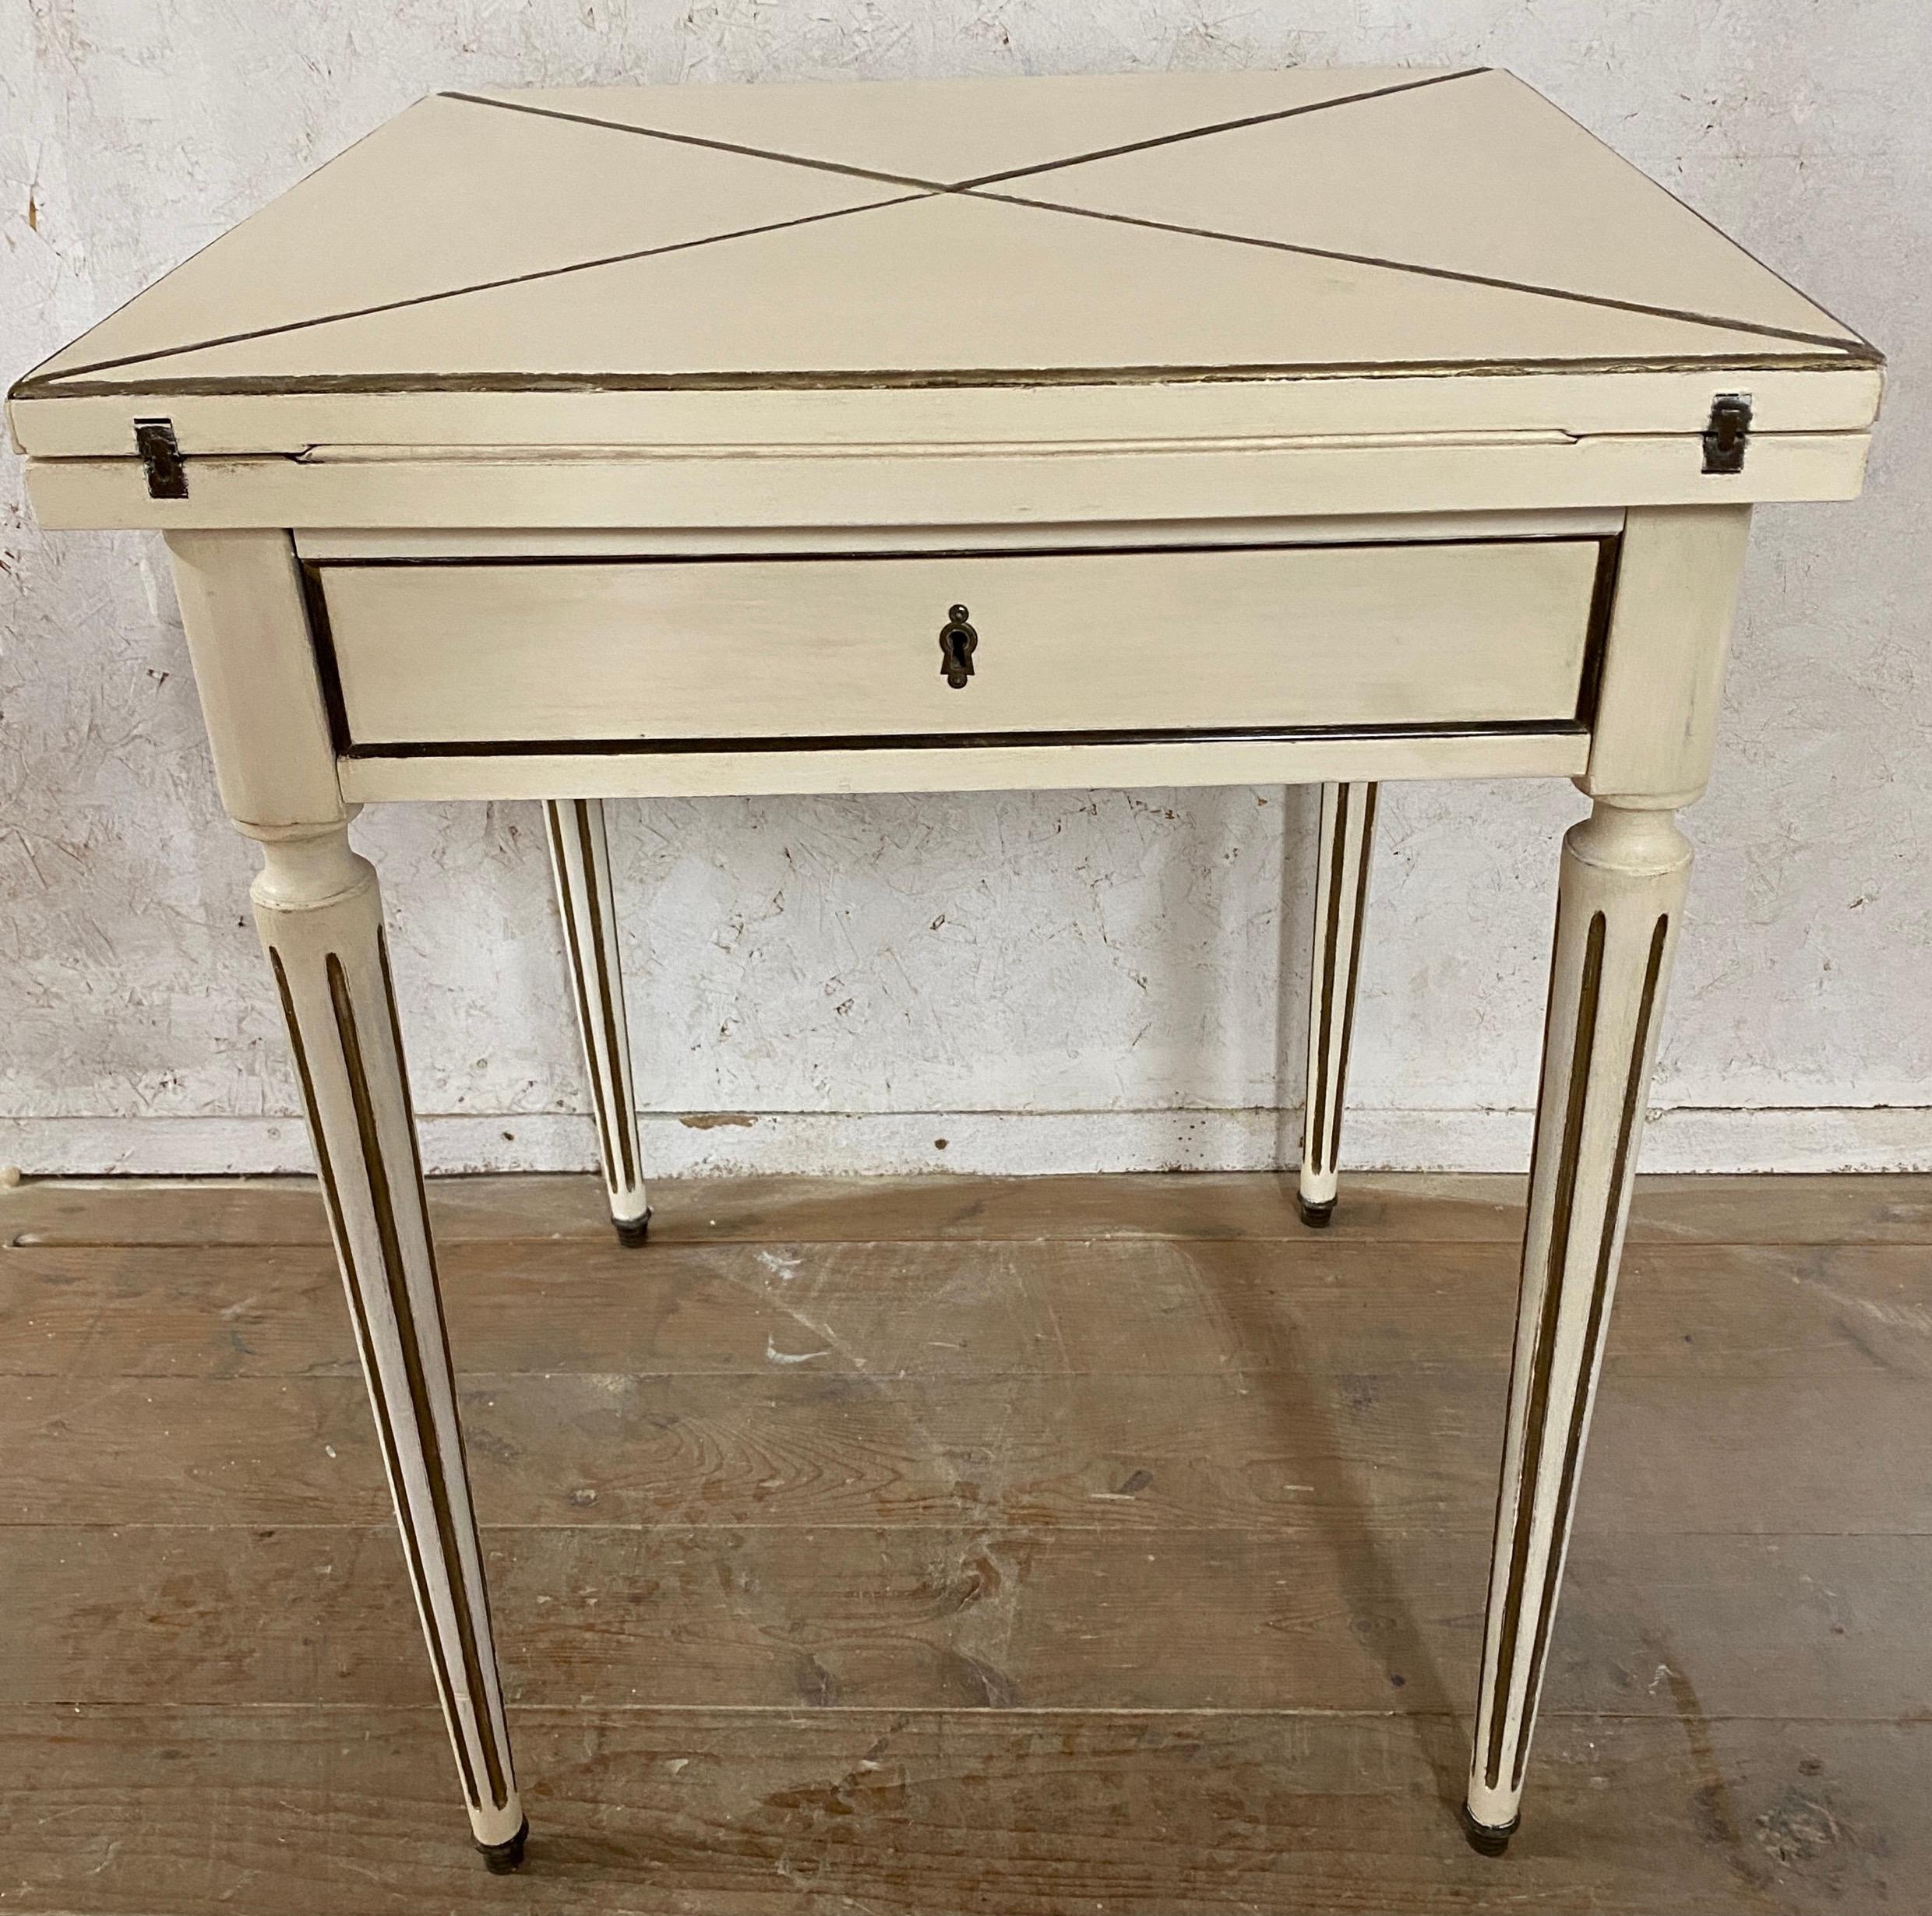 An elegant French envelope game table. By opening the four hinged triangular sections the small end table in the neoclassical style becomes a square game or card table with black leather, gold embossed playing surface. Painted white, the table has